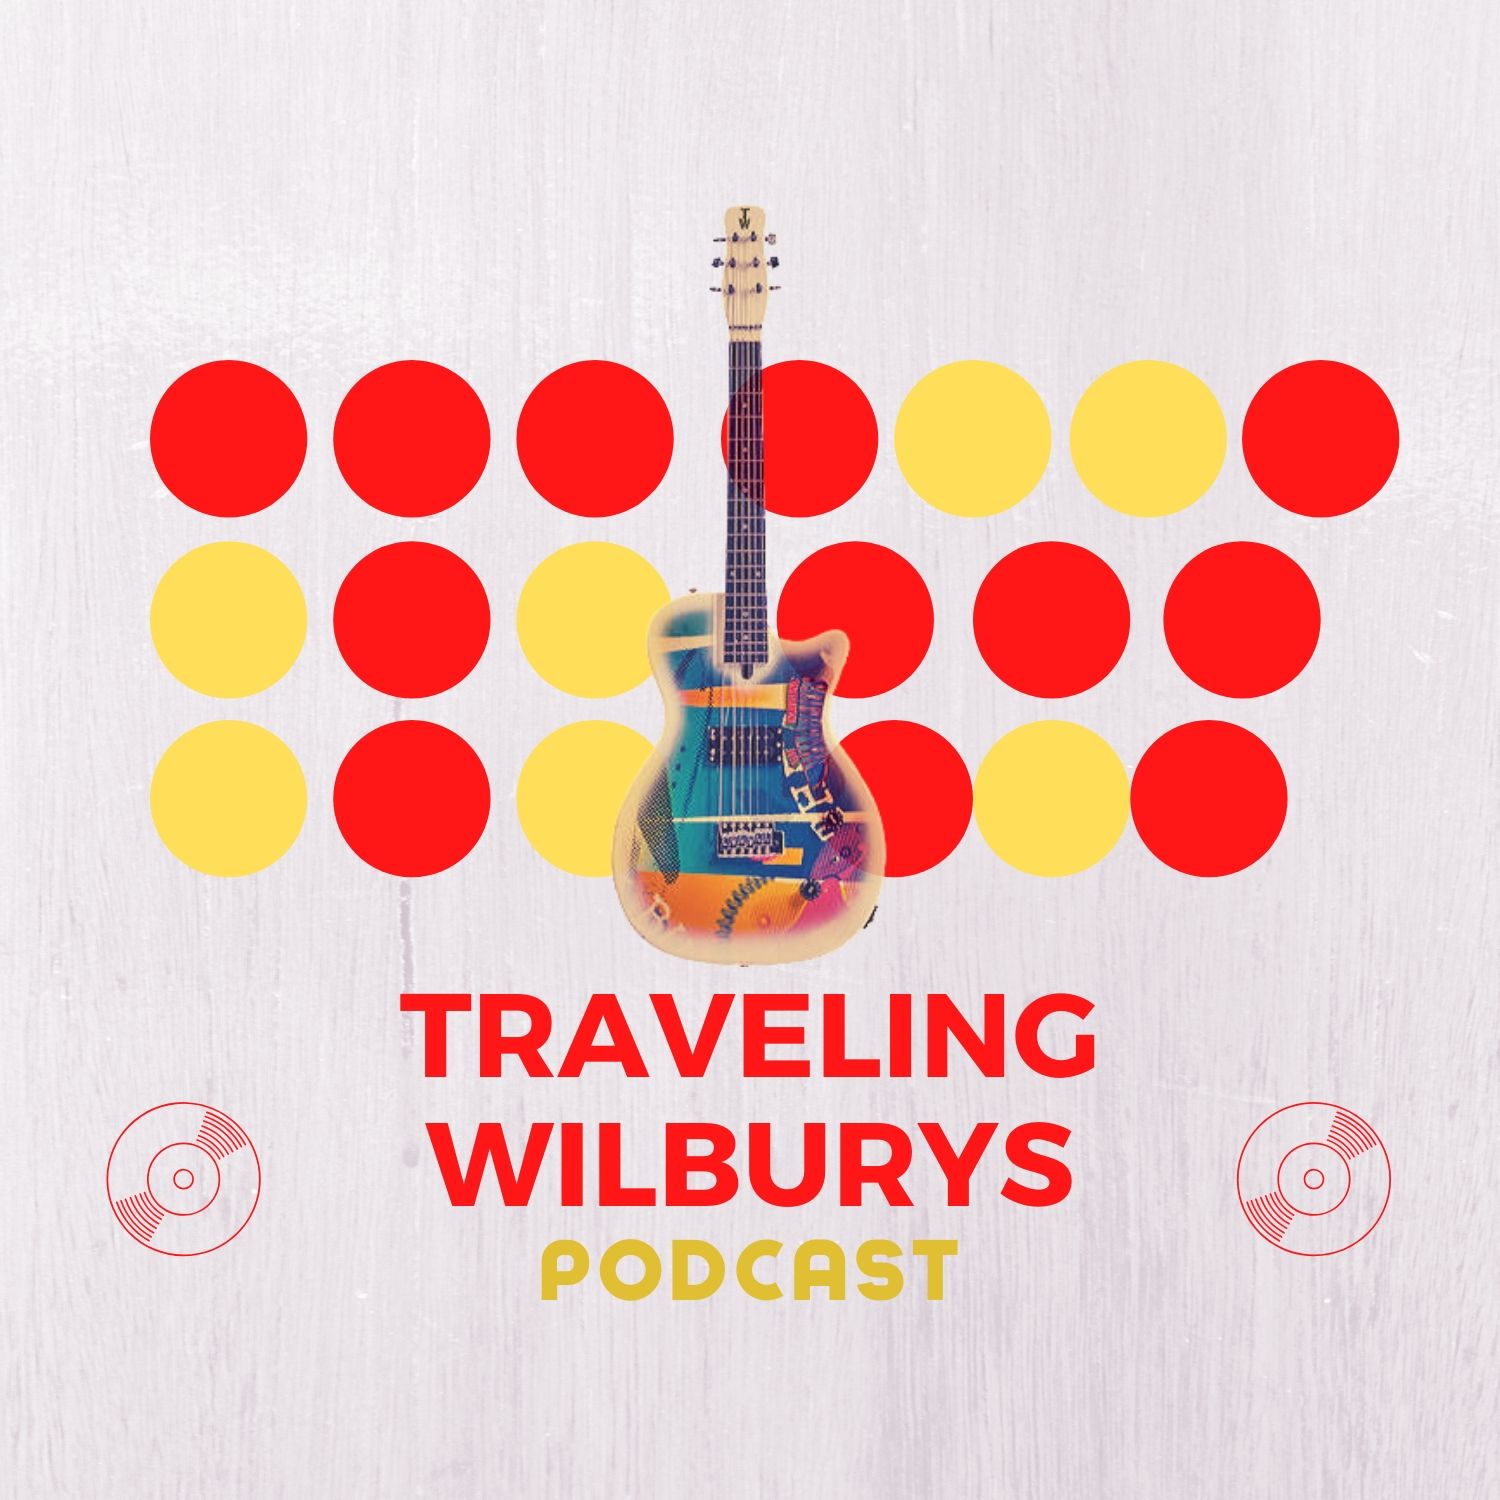 Traveling Wilburys Podcast | Listen Free on Castbox.